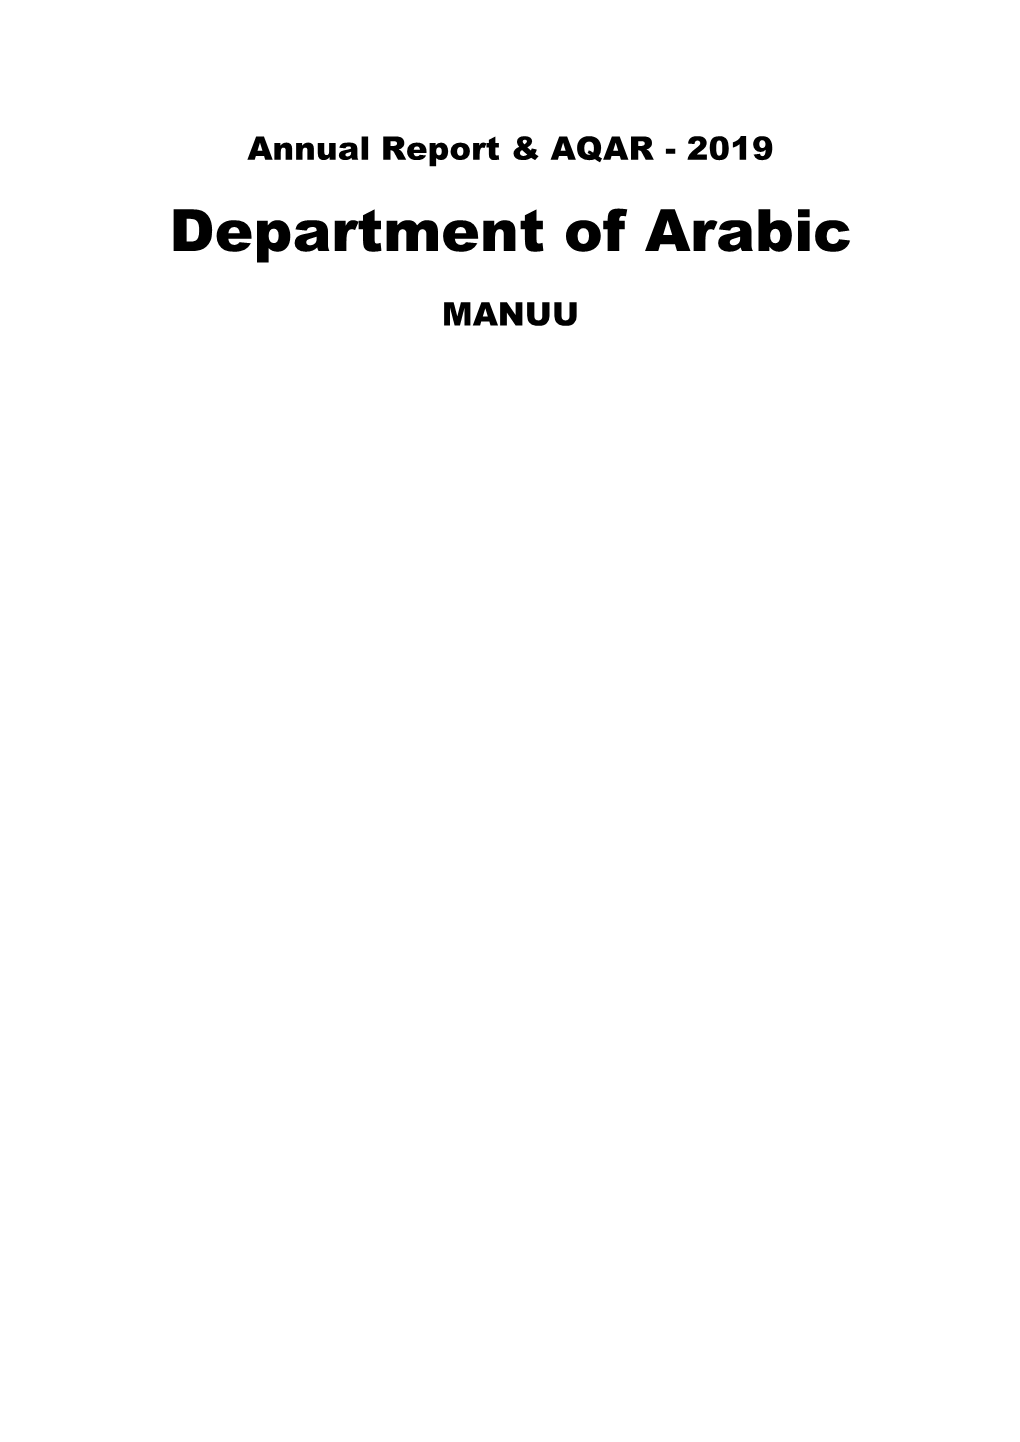 Annual Report & AQAR of the Departments/Colleges